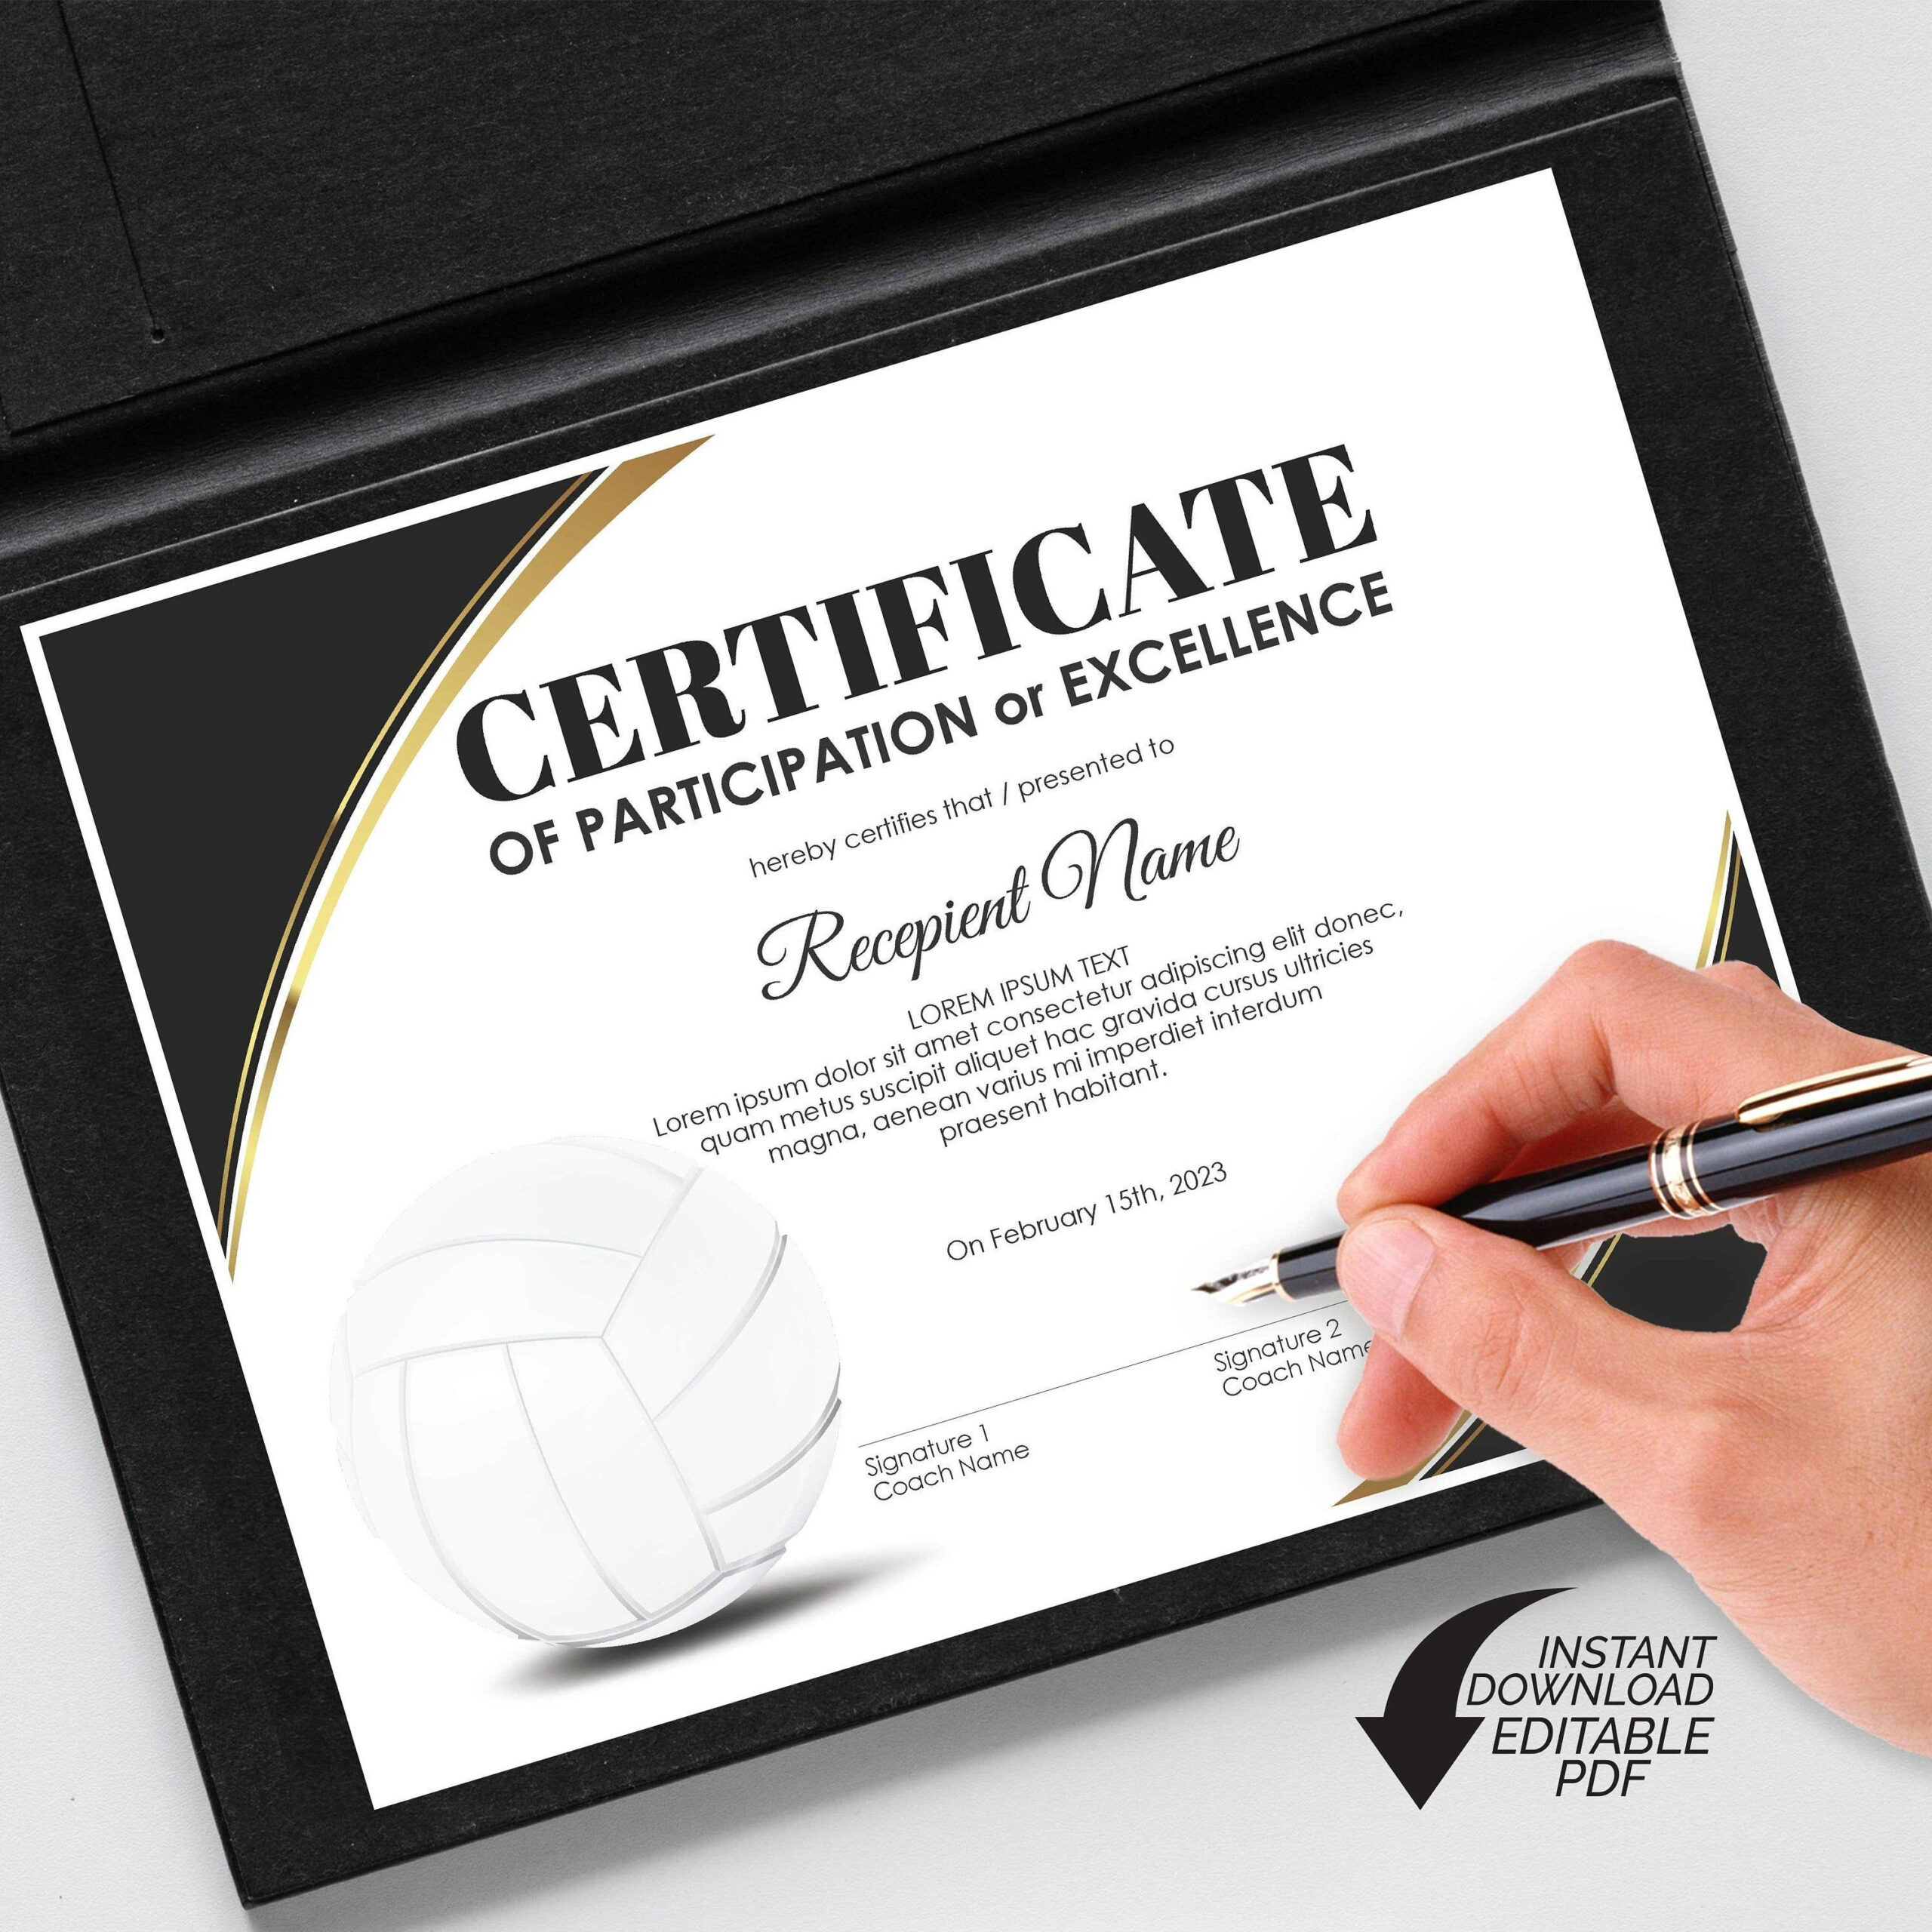 Editable Volleyball Award Certificate Template Printable | Etsy pertaining to Volleyball Award Certificate Template Free